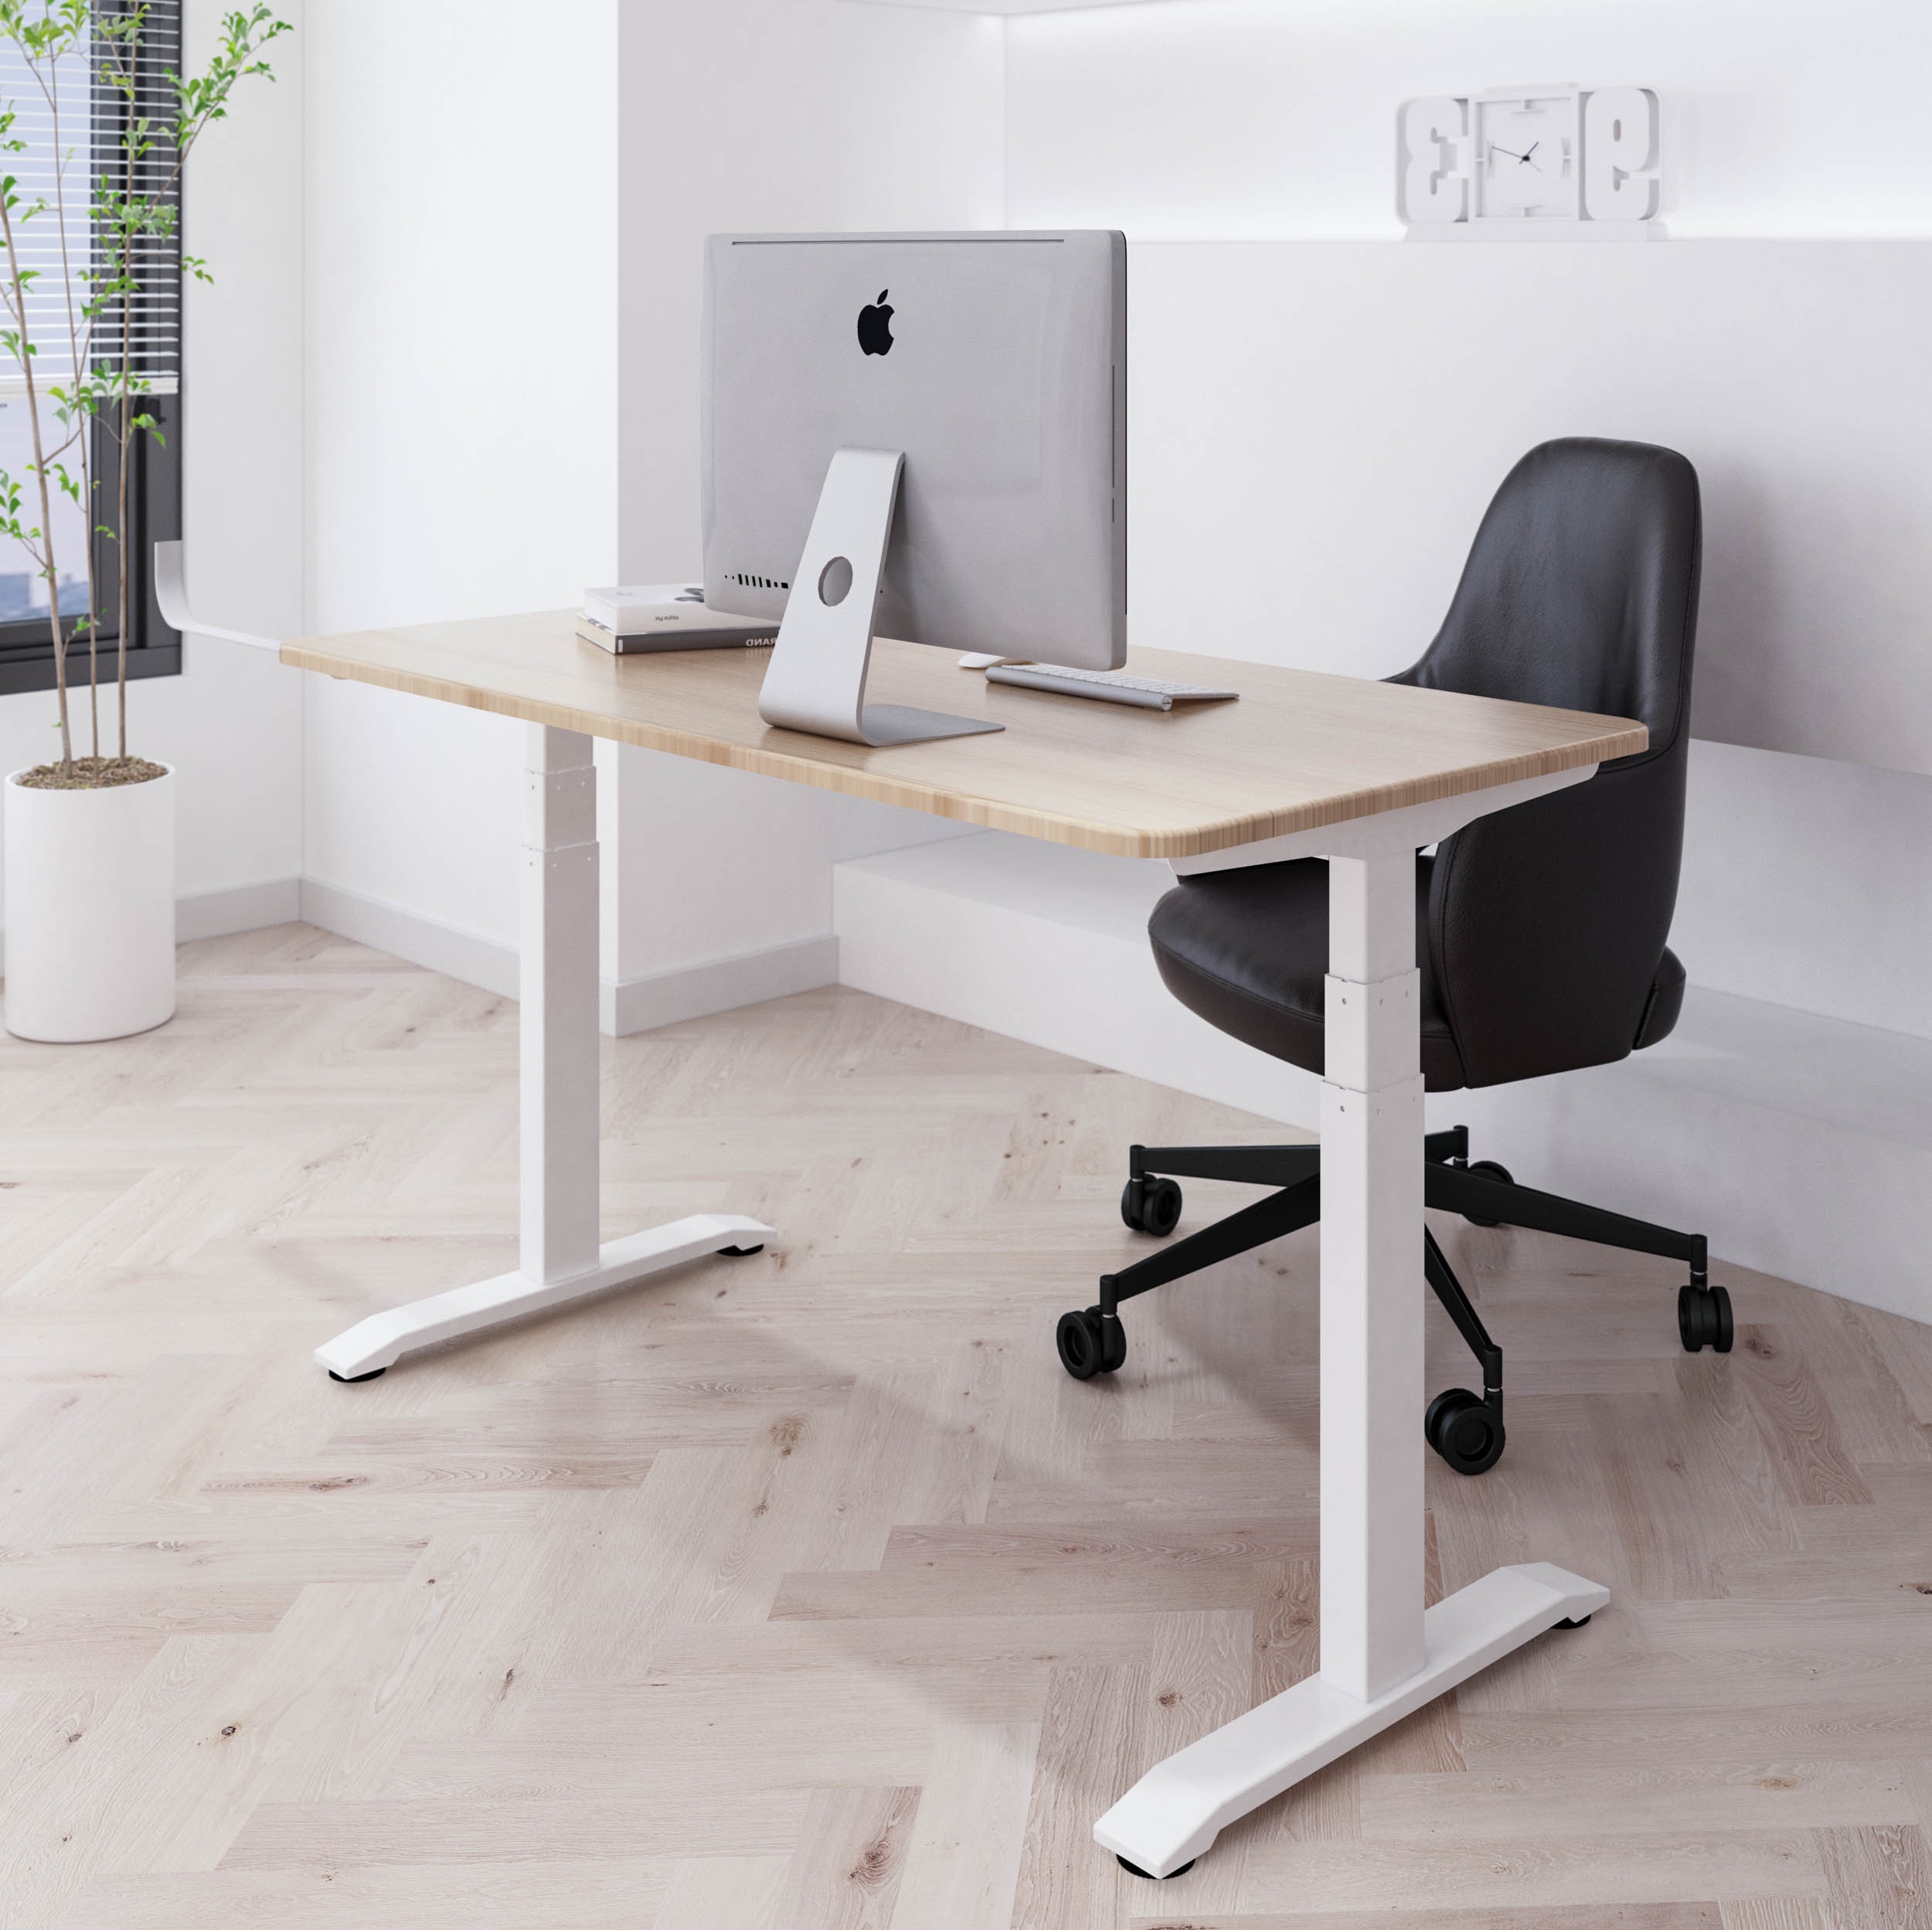 How to use Electric Standing Desk better